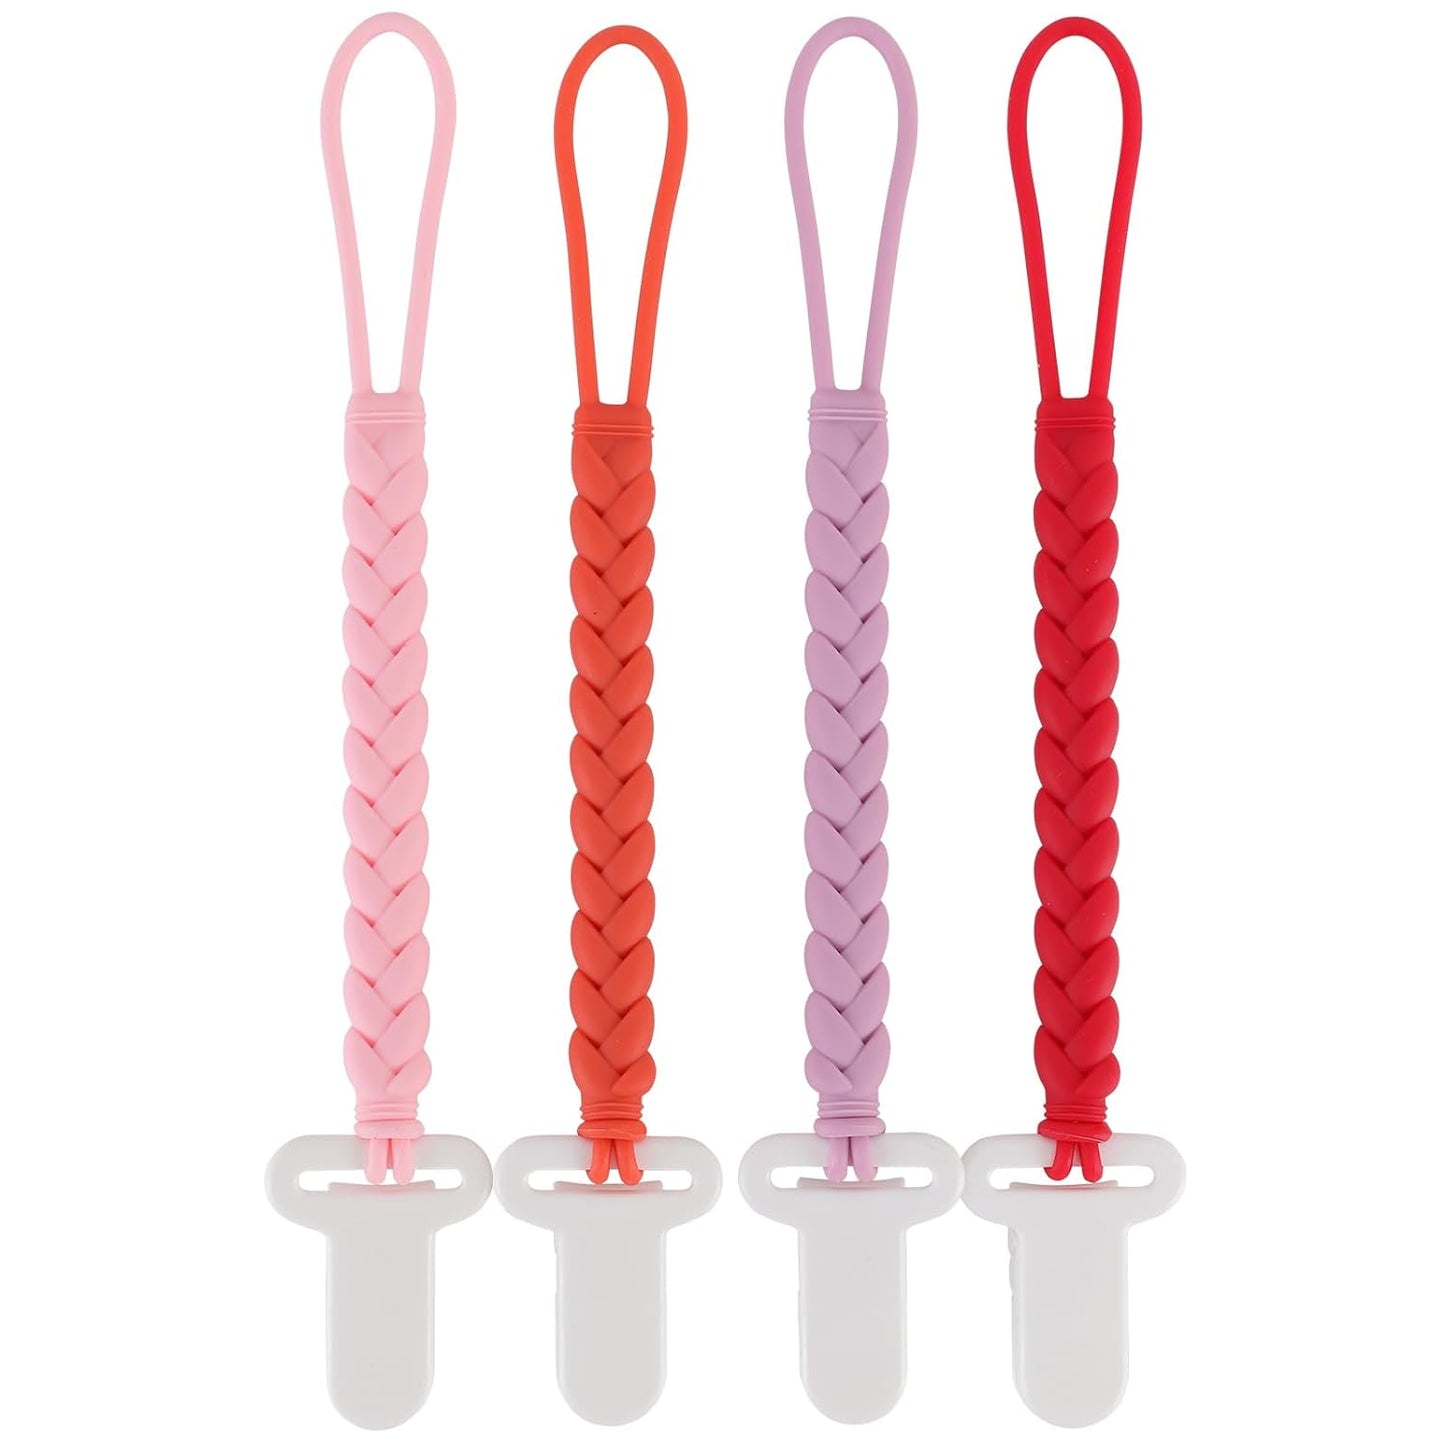 Woven Rope Shape Silicone Pacifier Clips - Teething Relief - 4Pack